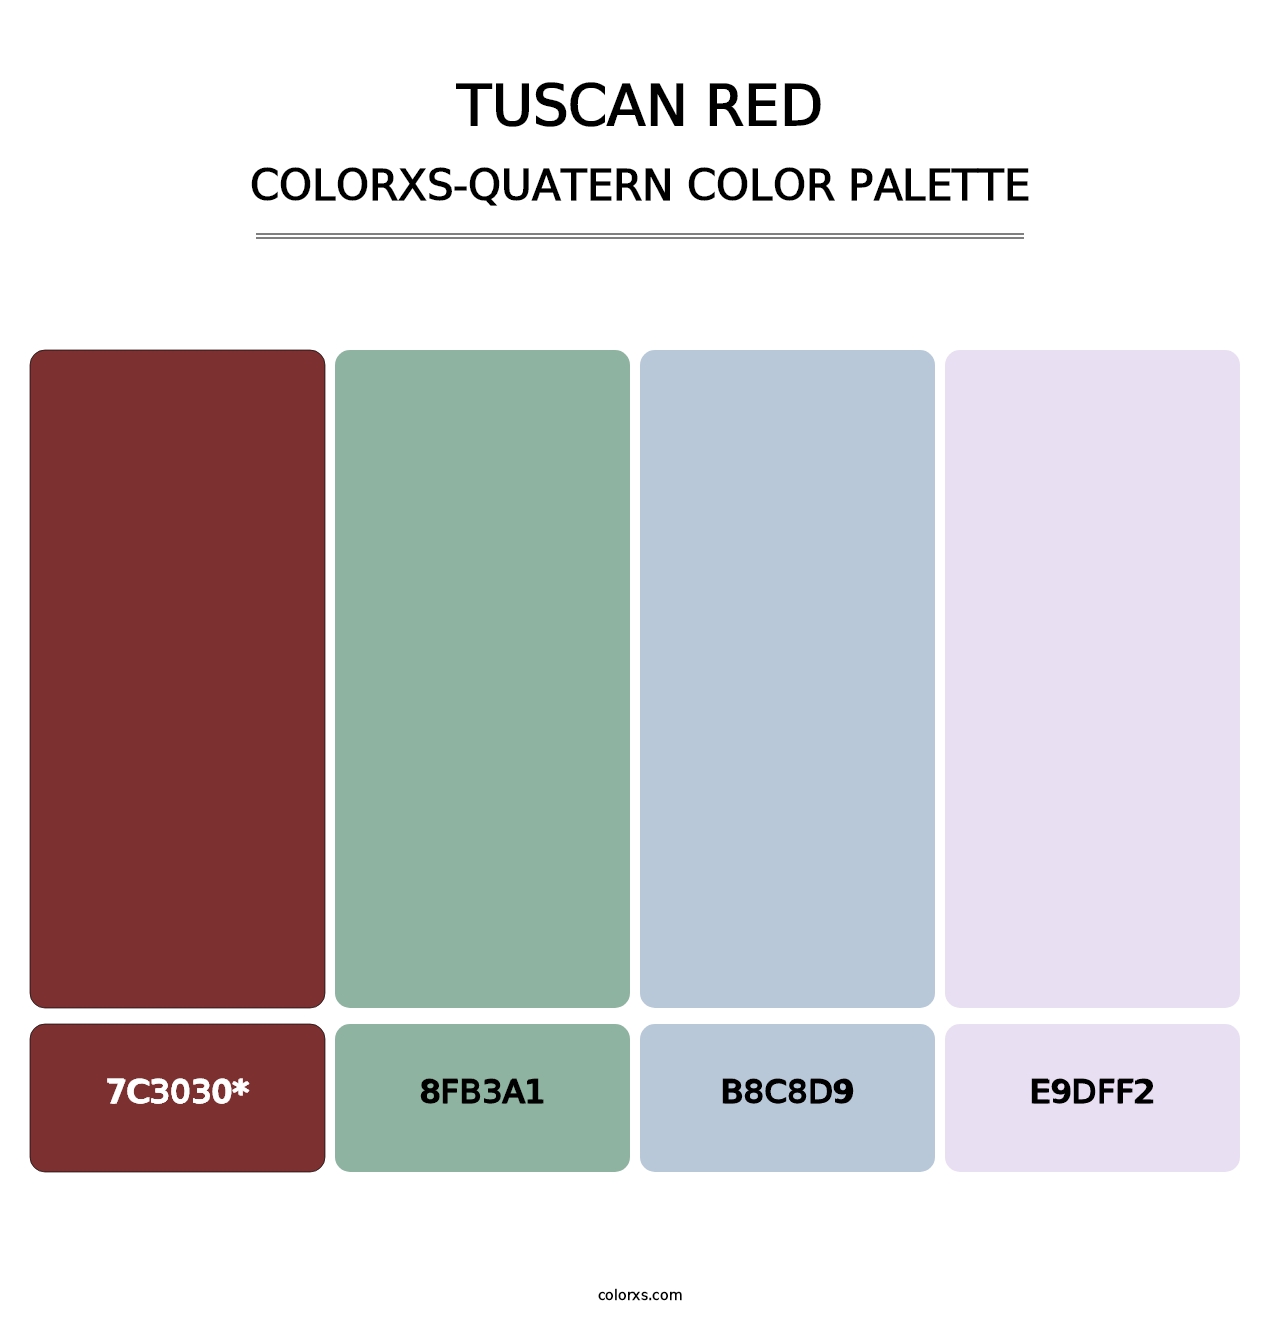 Tuscan Red - Colorxs Quatern Palette